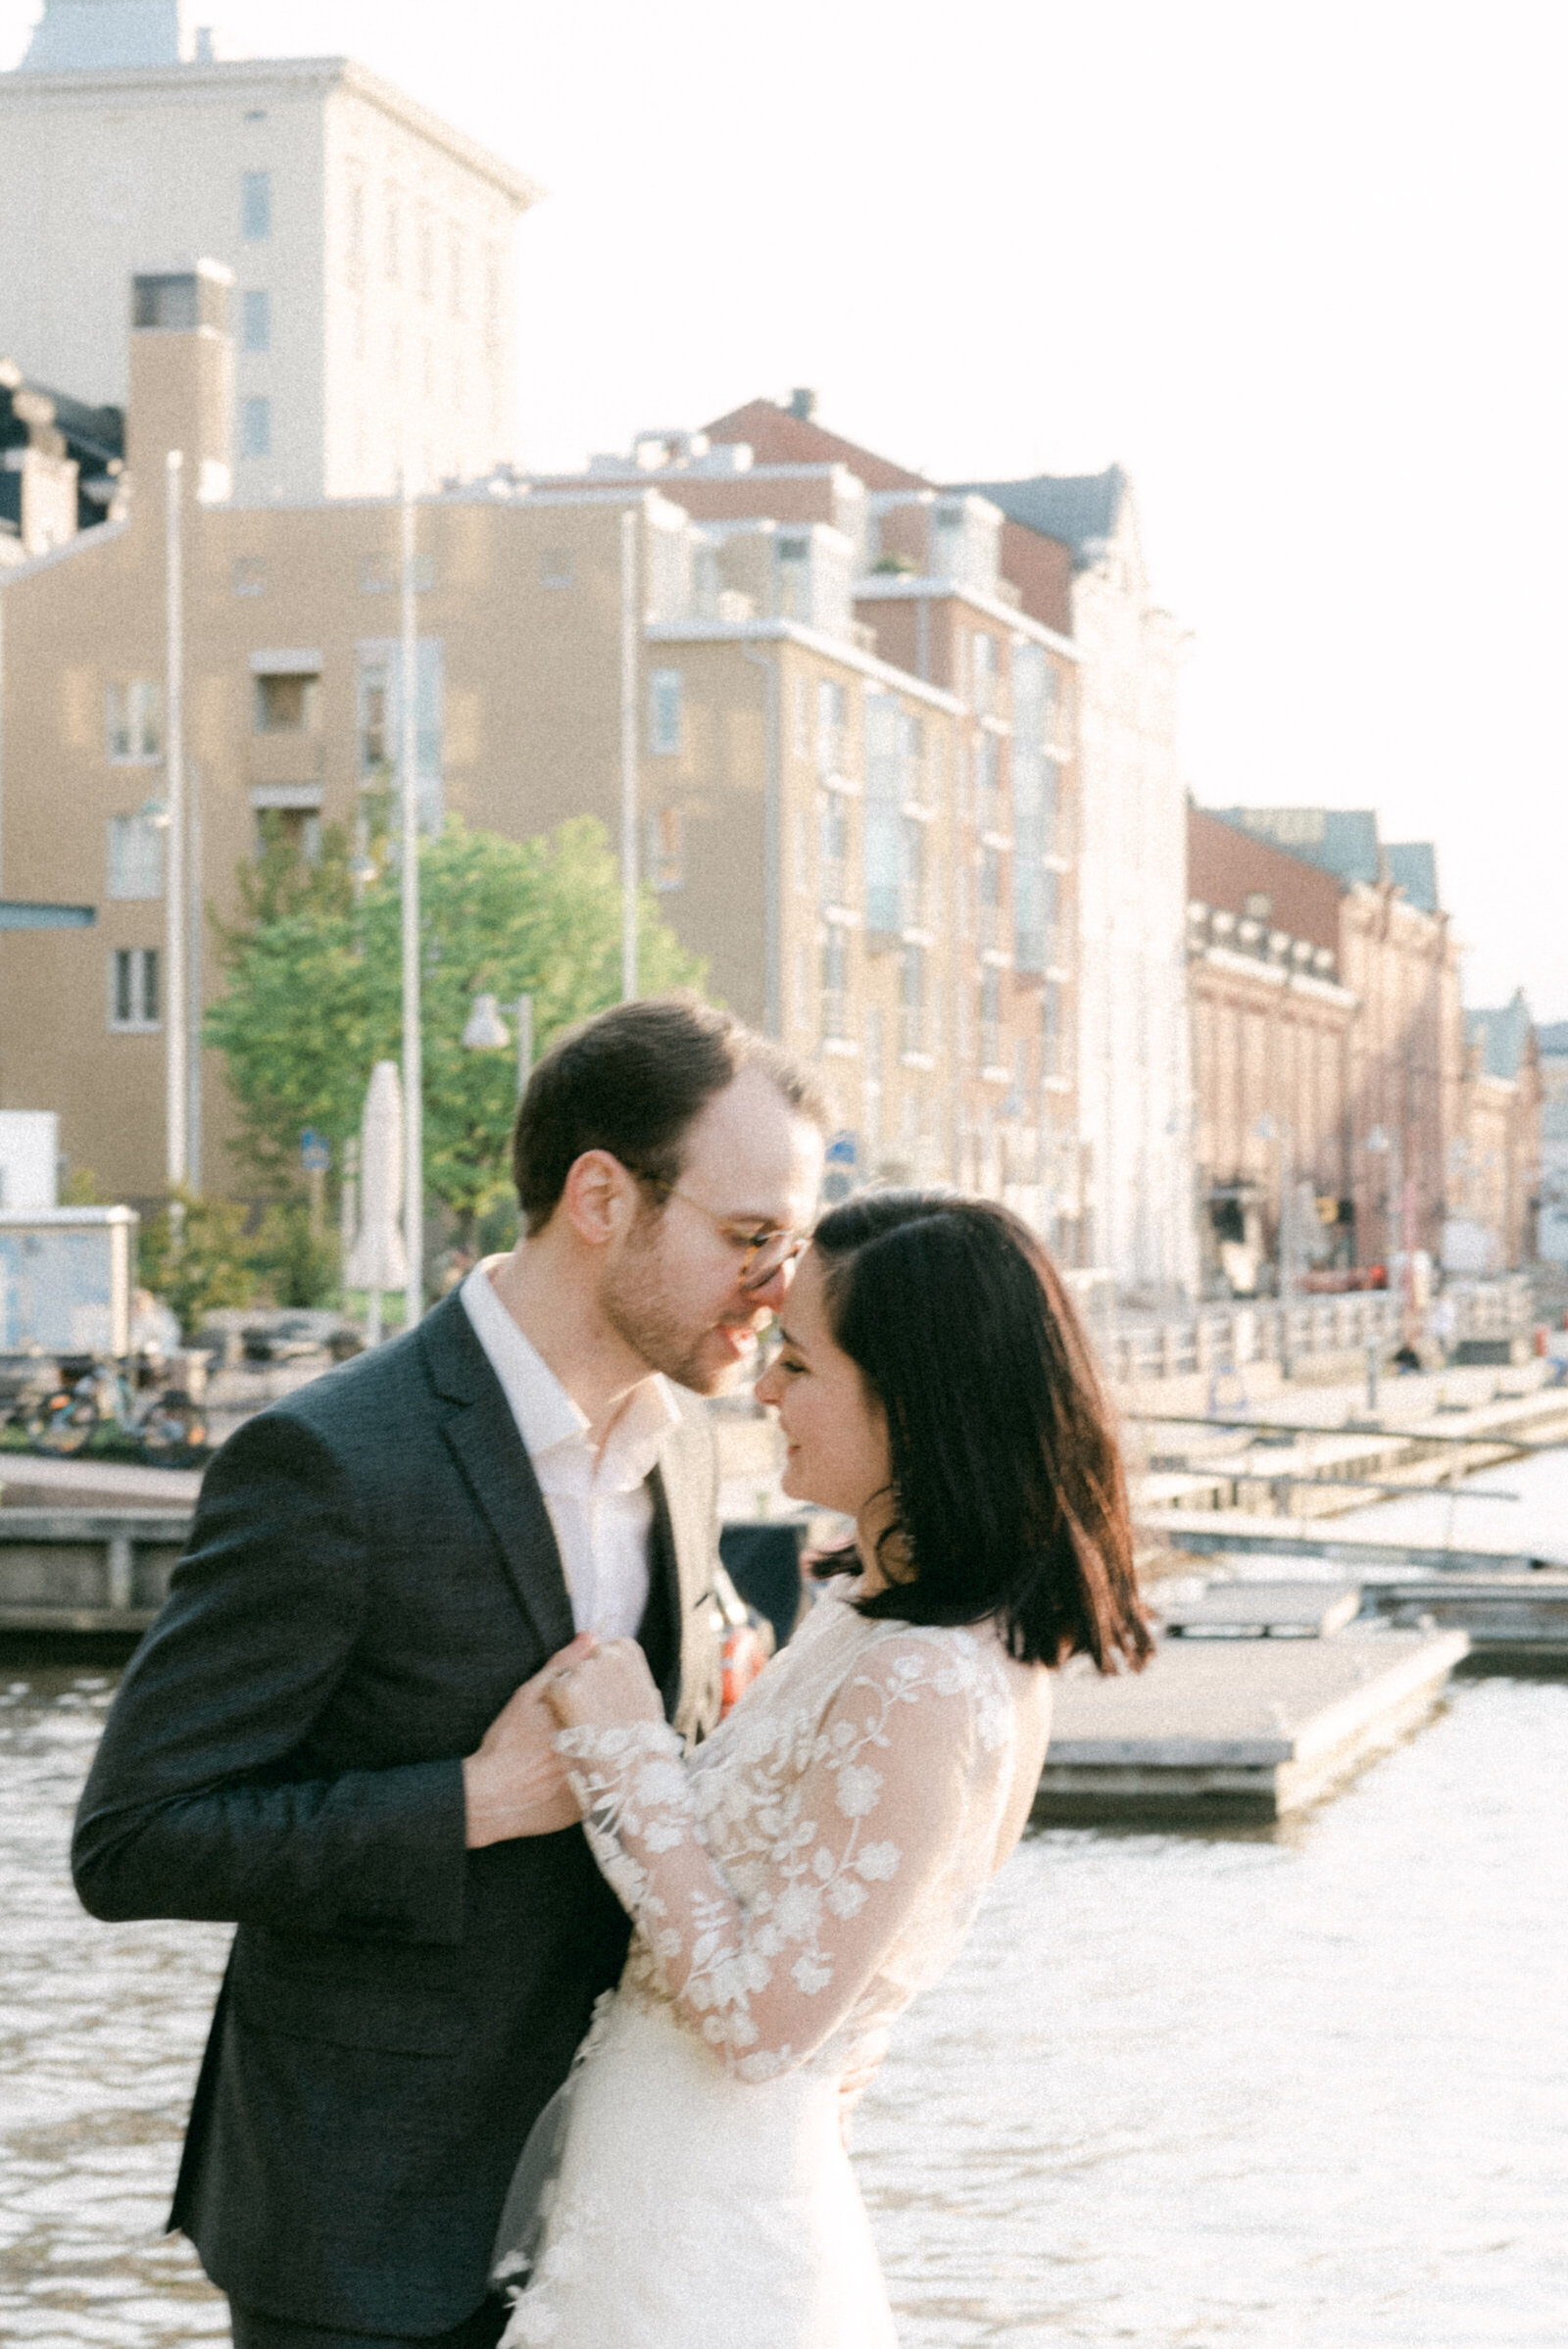 Seaside wedding photograph of a madly in love couple in Helsinki Finland captured by wedding photographer Hannika Gabrielsson.